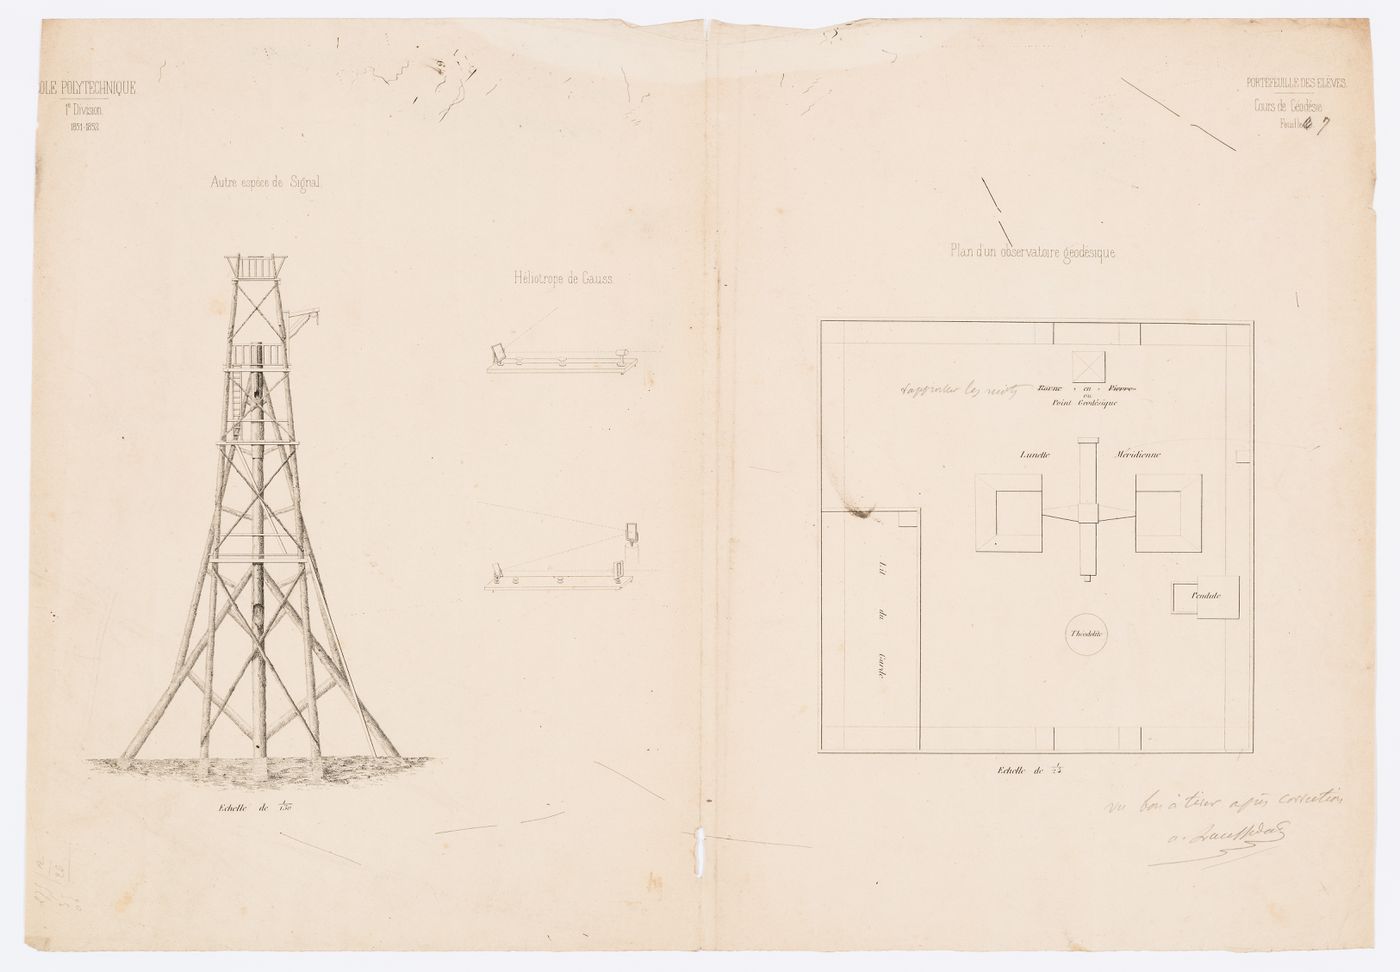 Plan and elevation for a signal tower: artist's proof of a print for the Ecole polytechnique